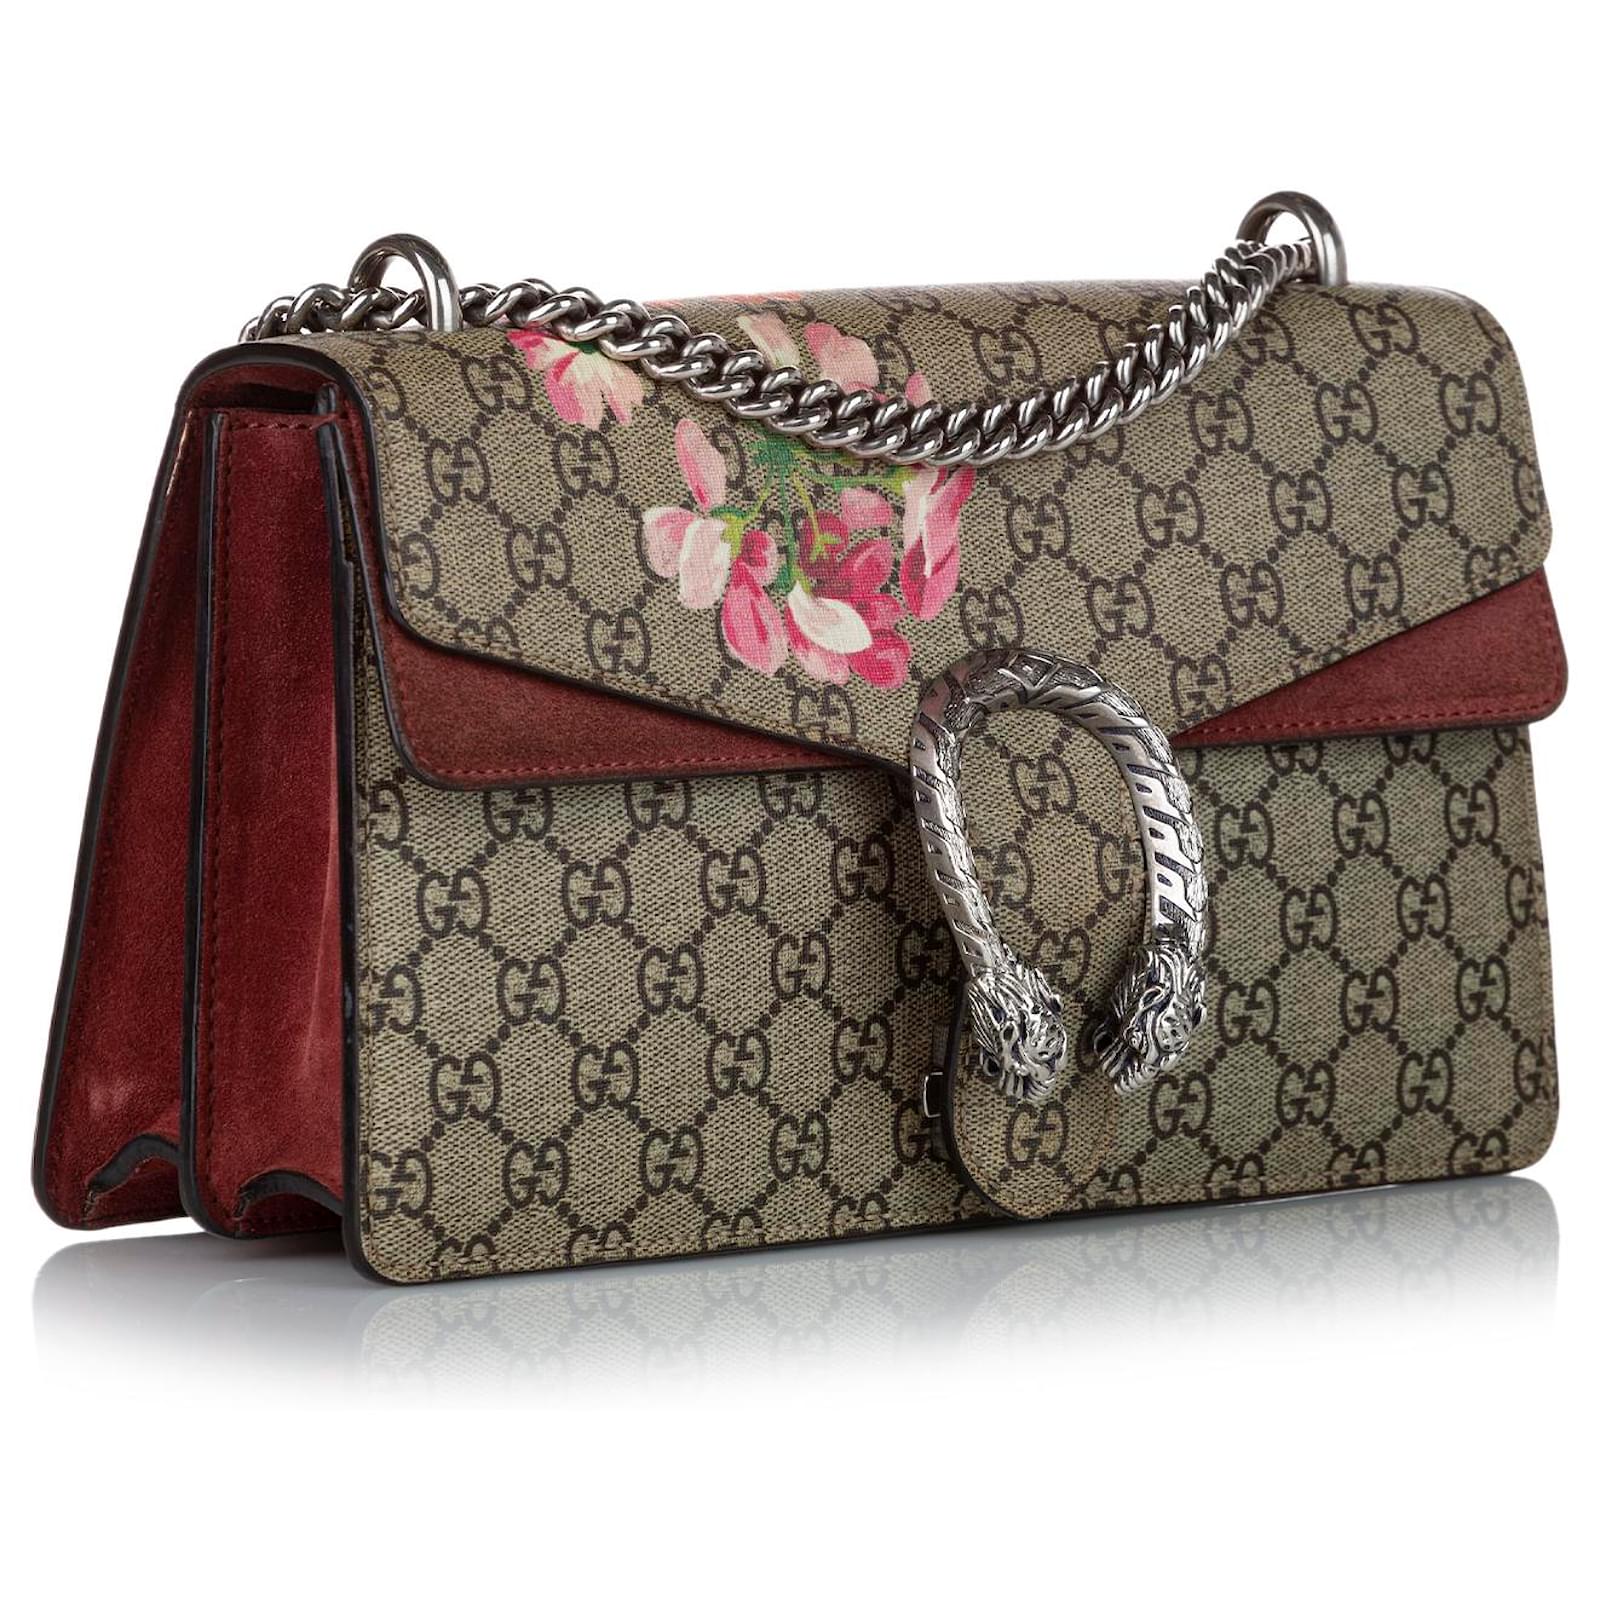 BAG of the Day 1: GUCCI Dionysus Blooms leather small